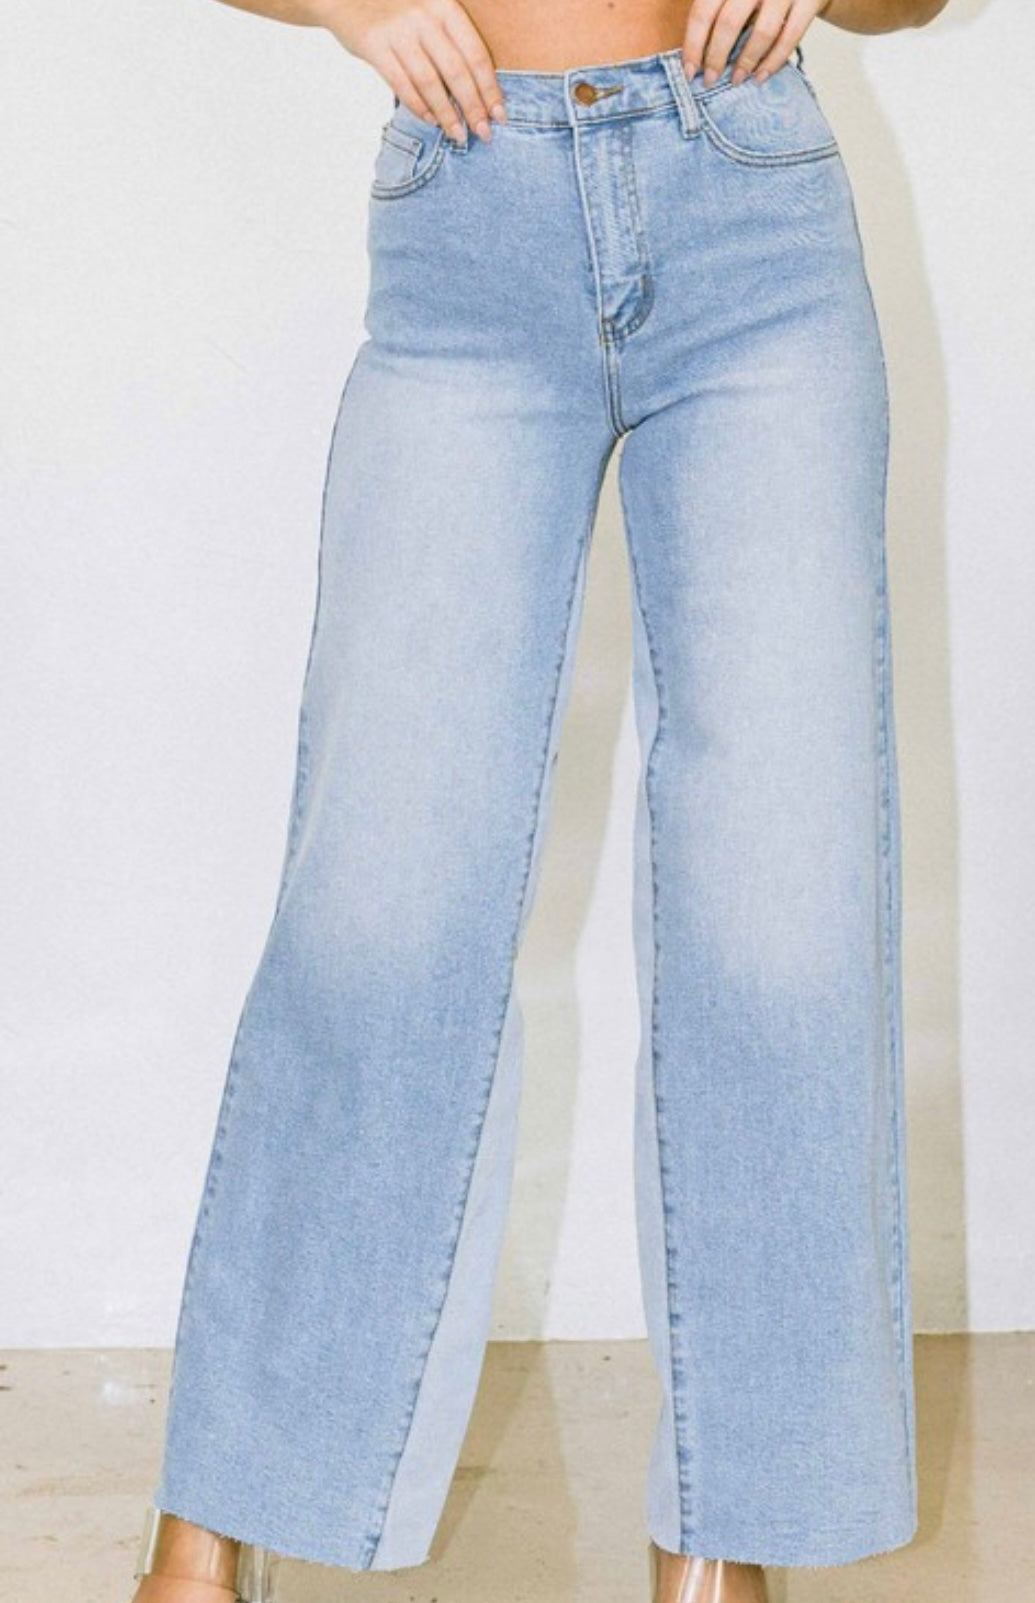 two tone jeans